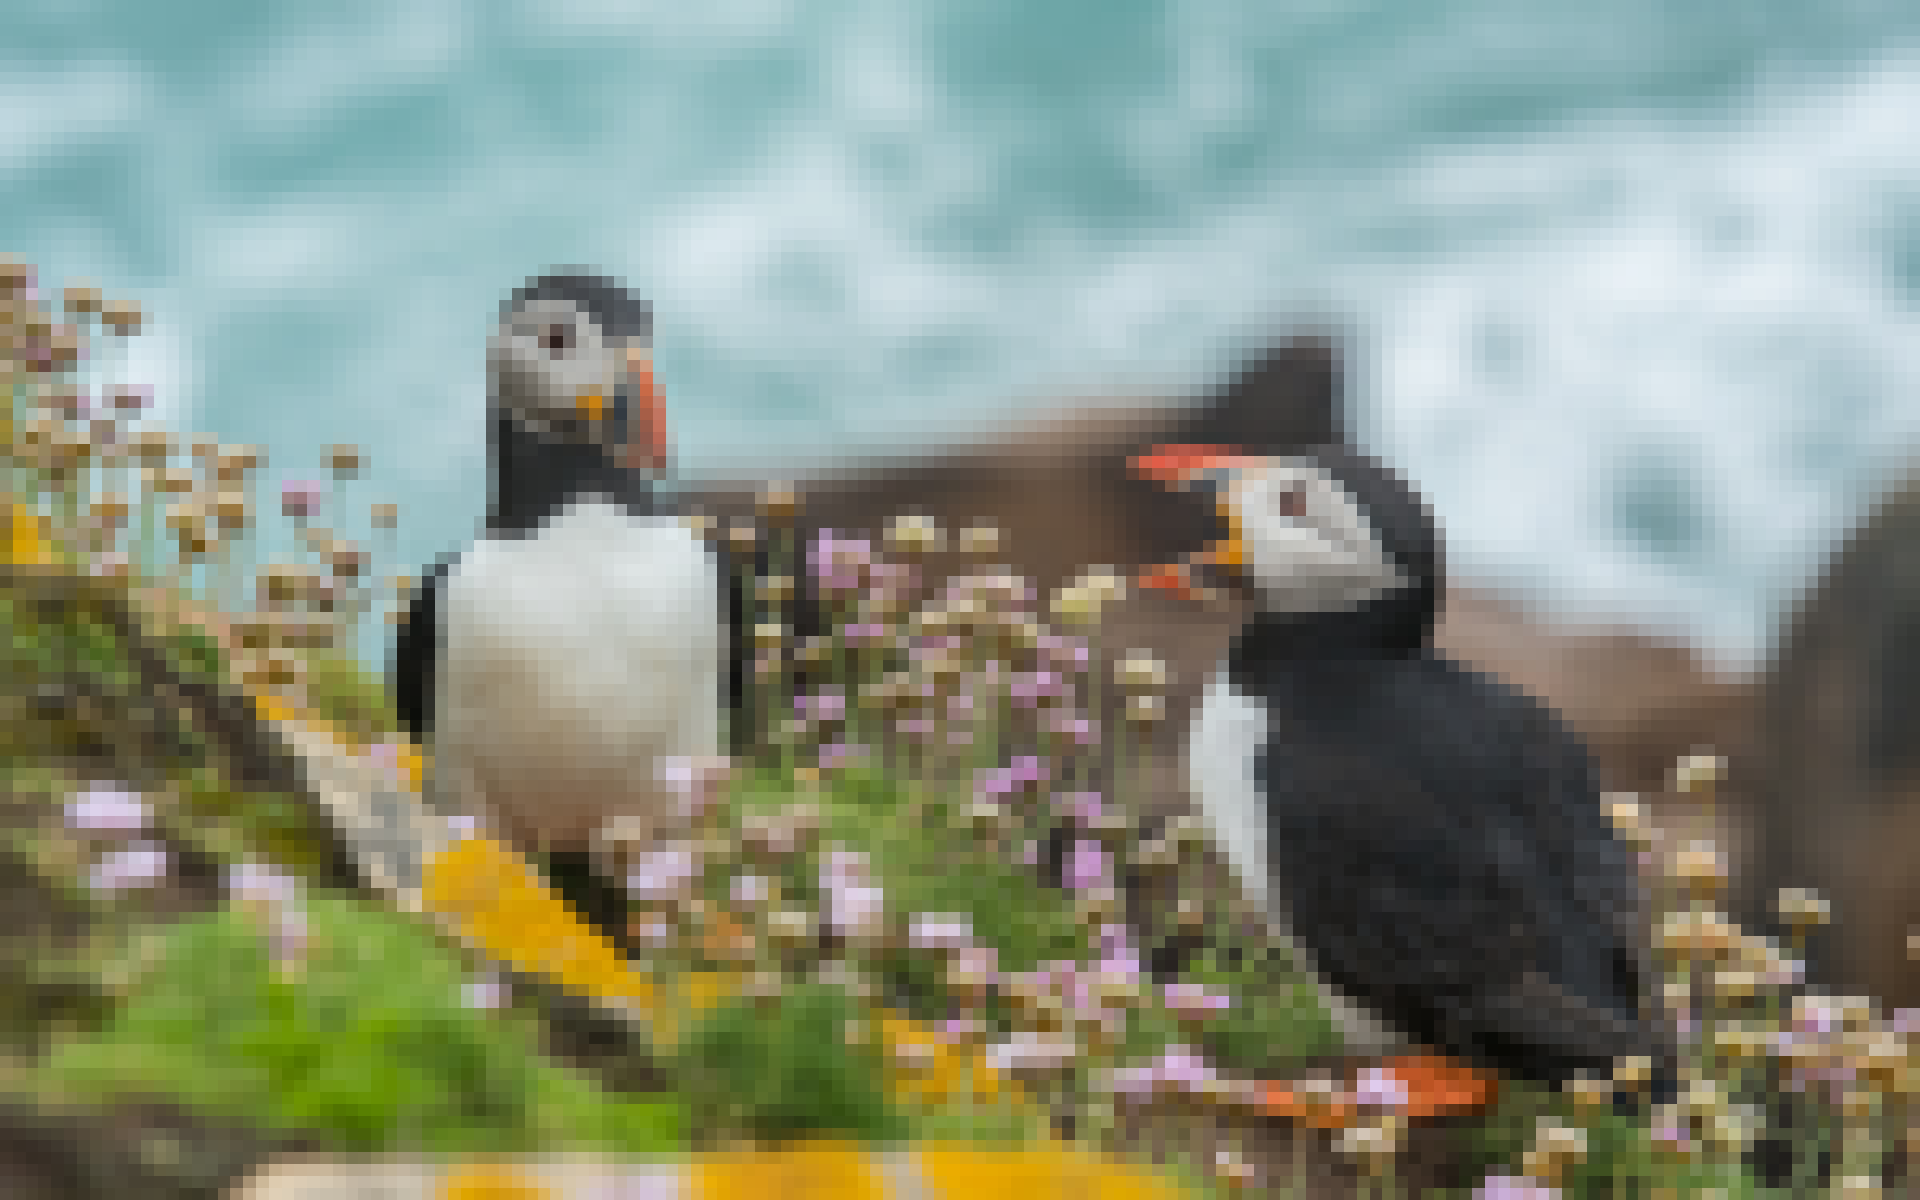 Pixelated version of “puffins” image